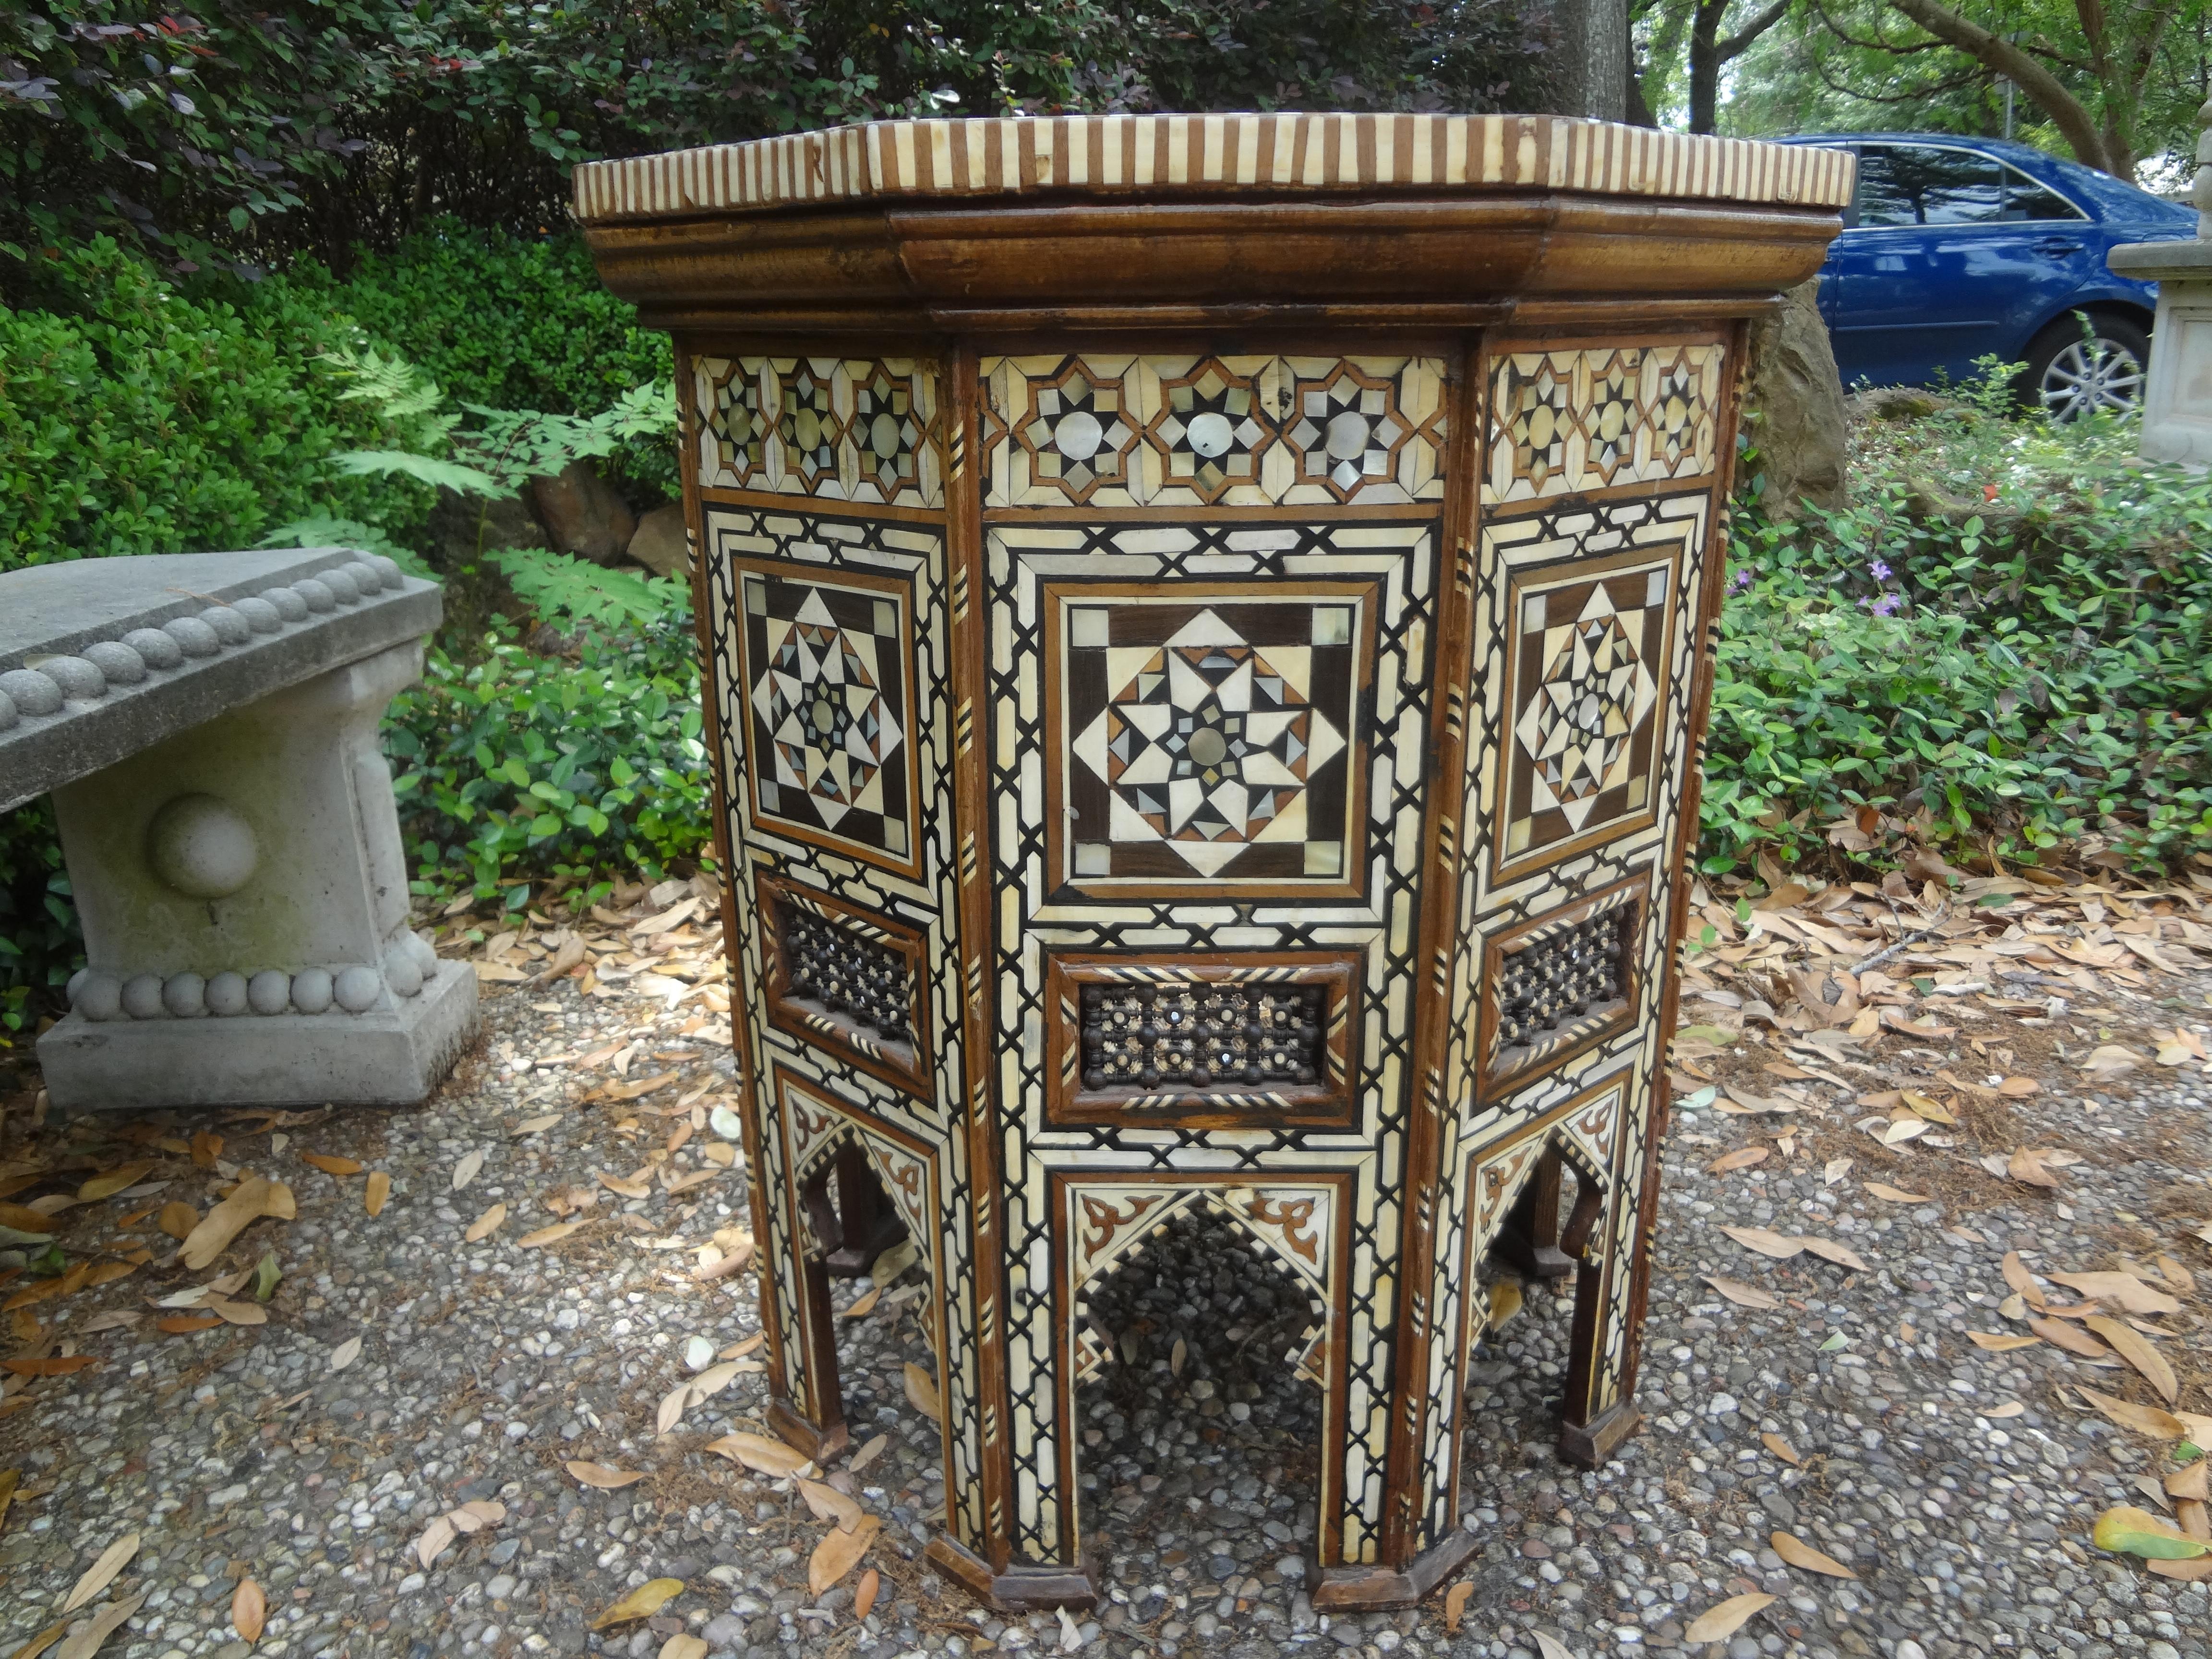 Large antique Moroccan Arabesque style octagonal inlaid table.
This stunning Moroccan octagon shaped table is inlaid with various woods, bone and mother of pearl and dates to the 1920s. Great side table, center table, accent table, occasional table